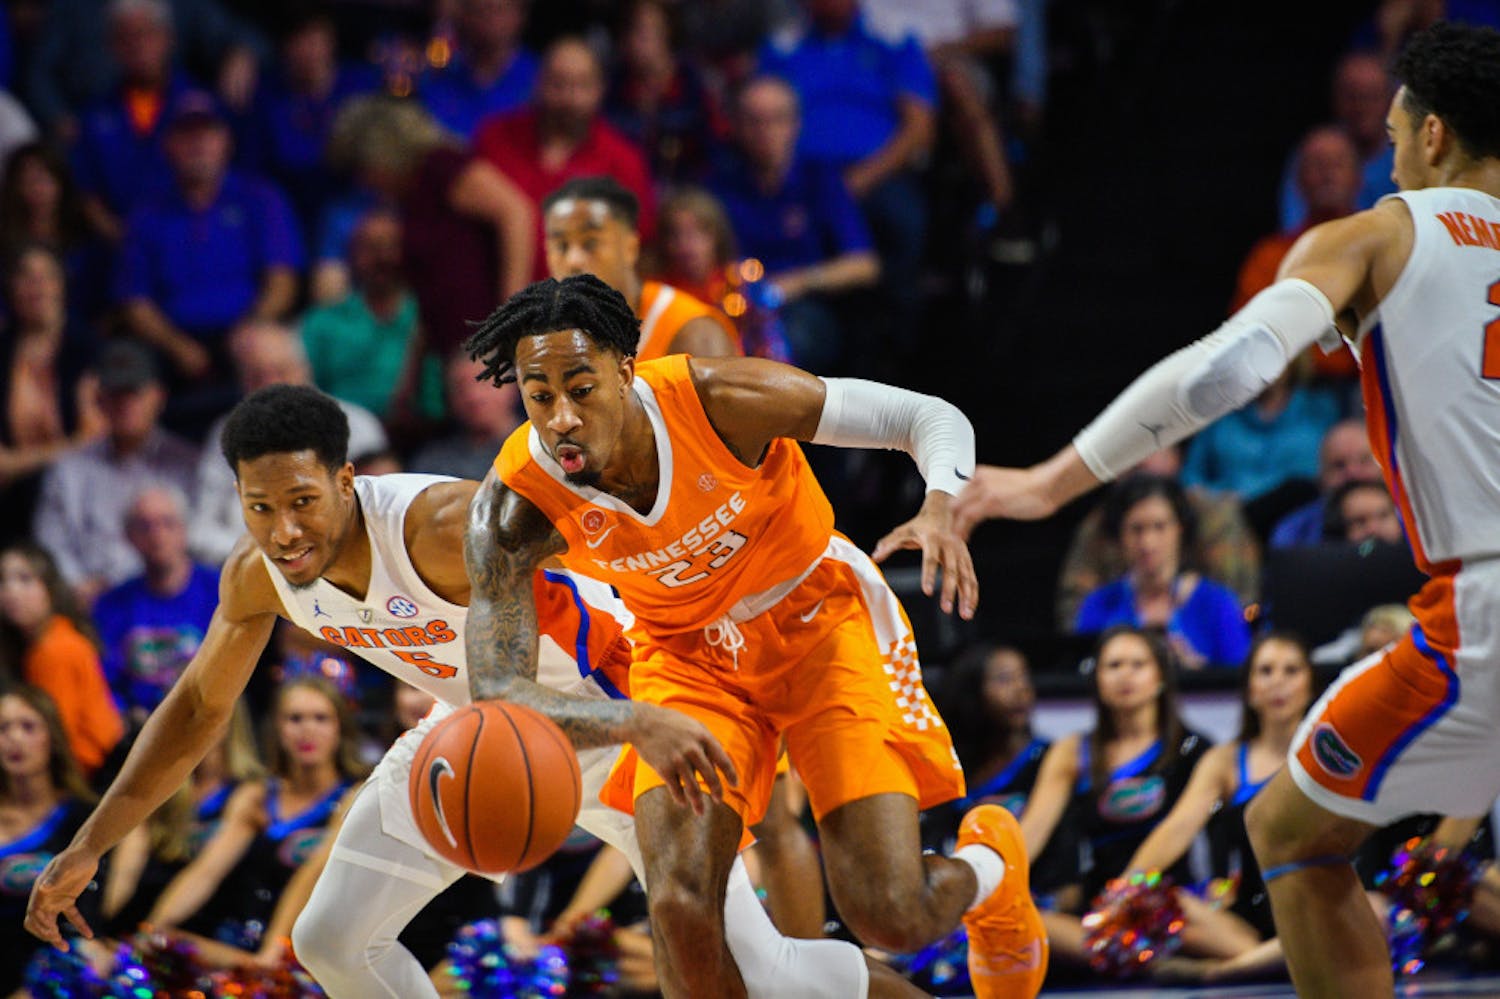 UF guard KeVaughn Allen scored a game-high 17 points on 5-of-12 shooting during Florida's 71-68 loss to Mississippi State on Tuesday in Starkville, Mississippi.